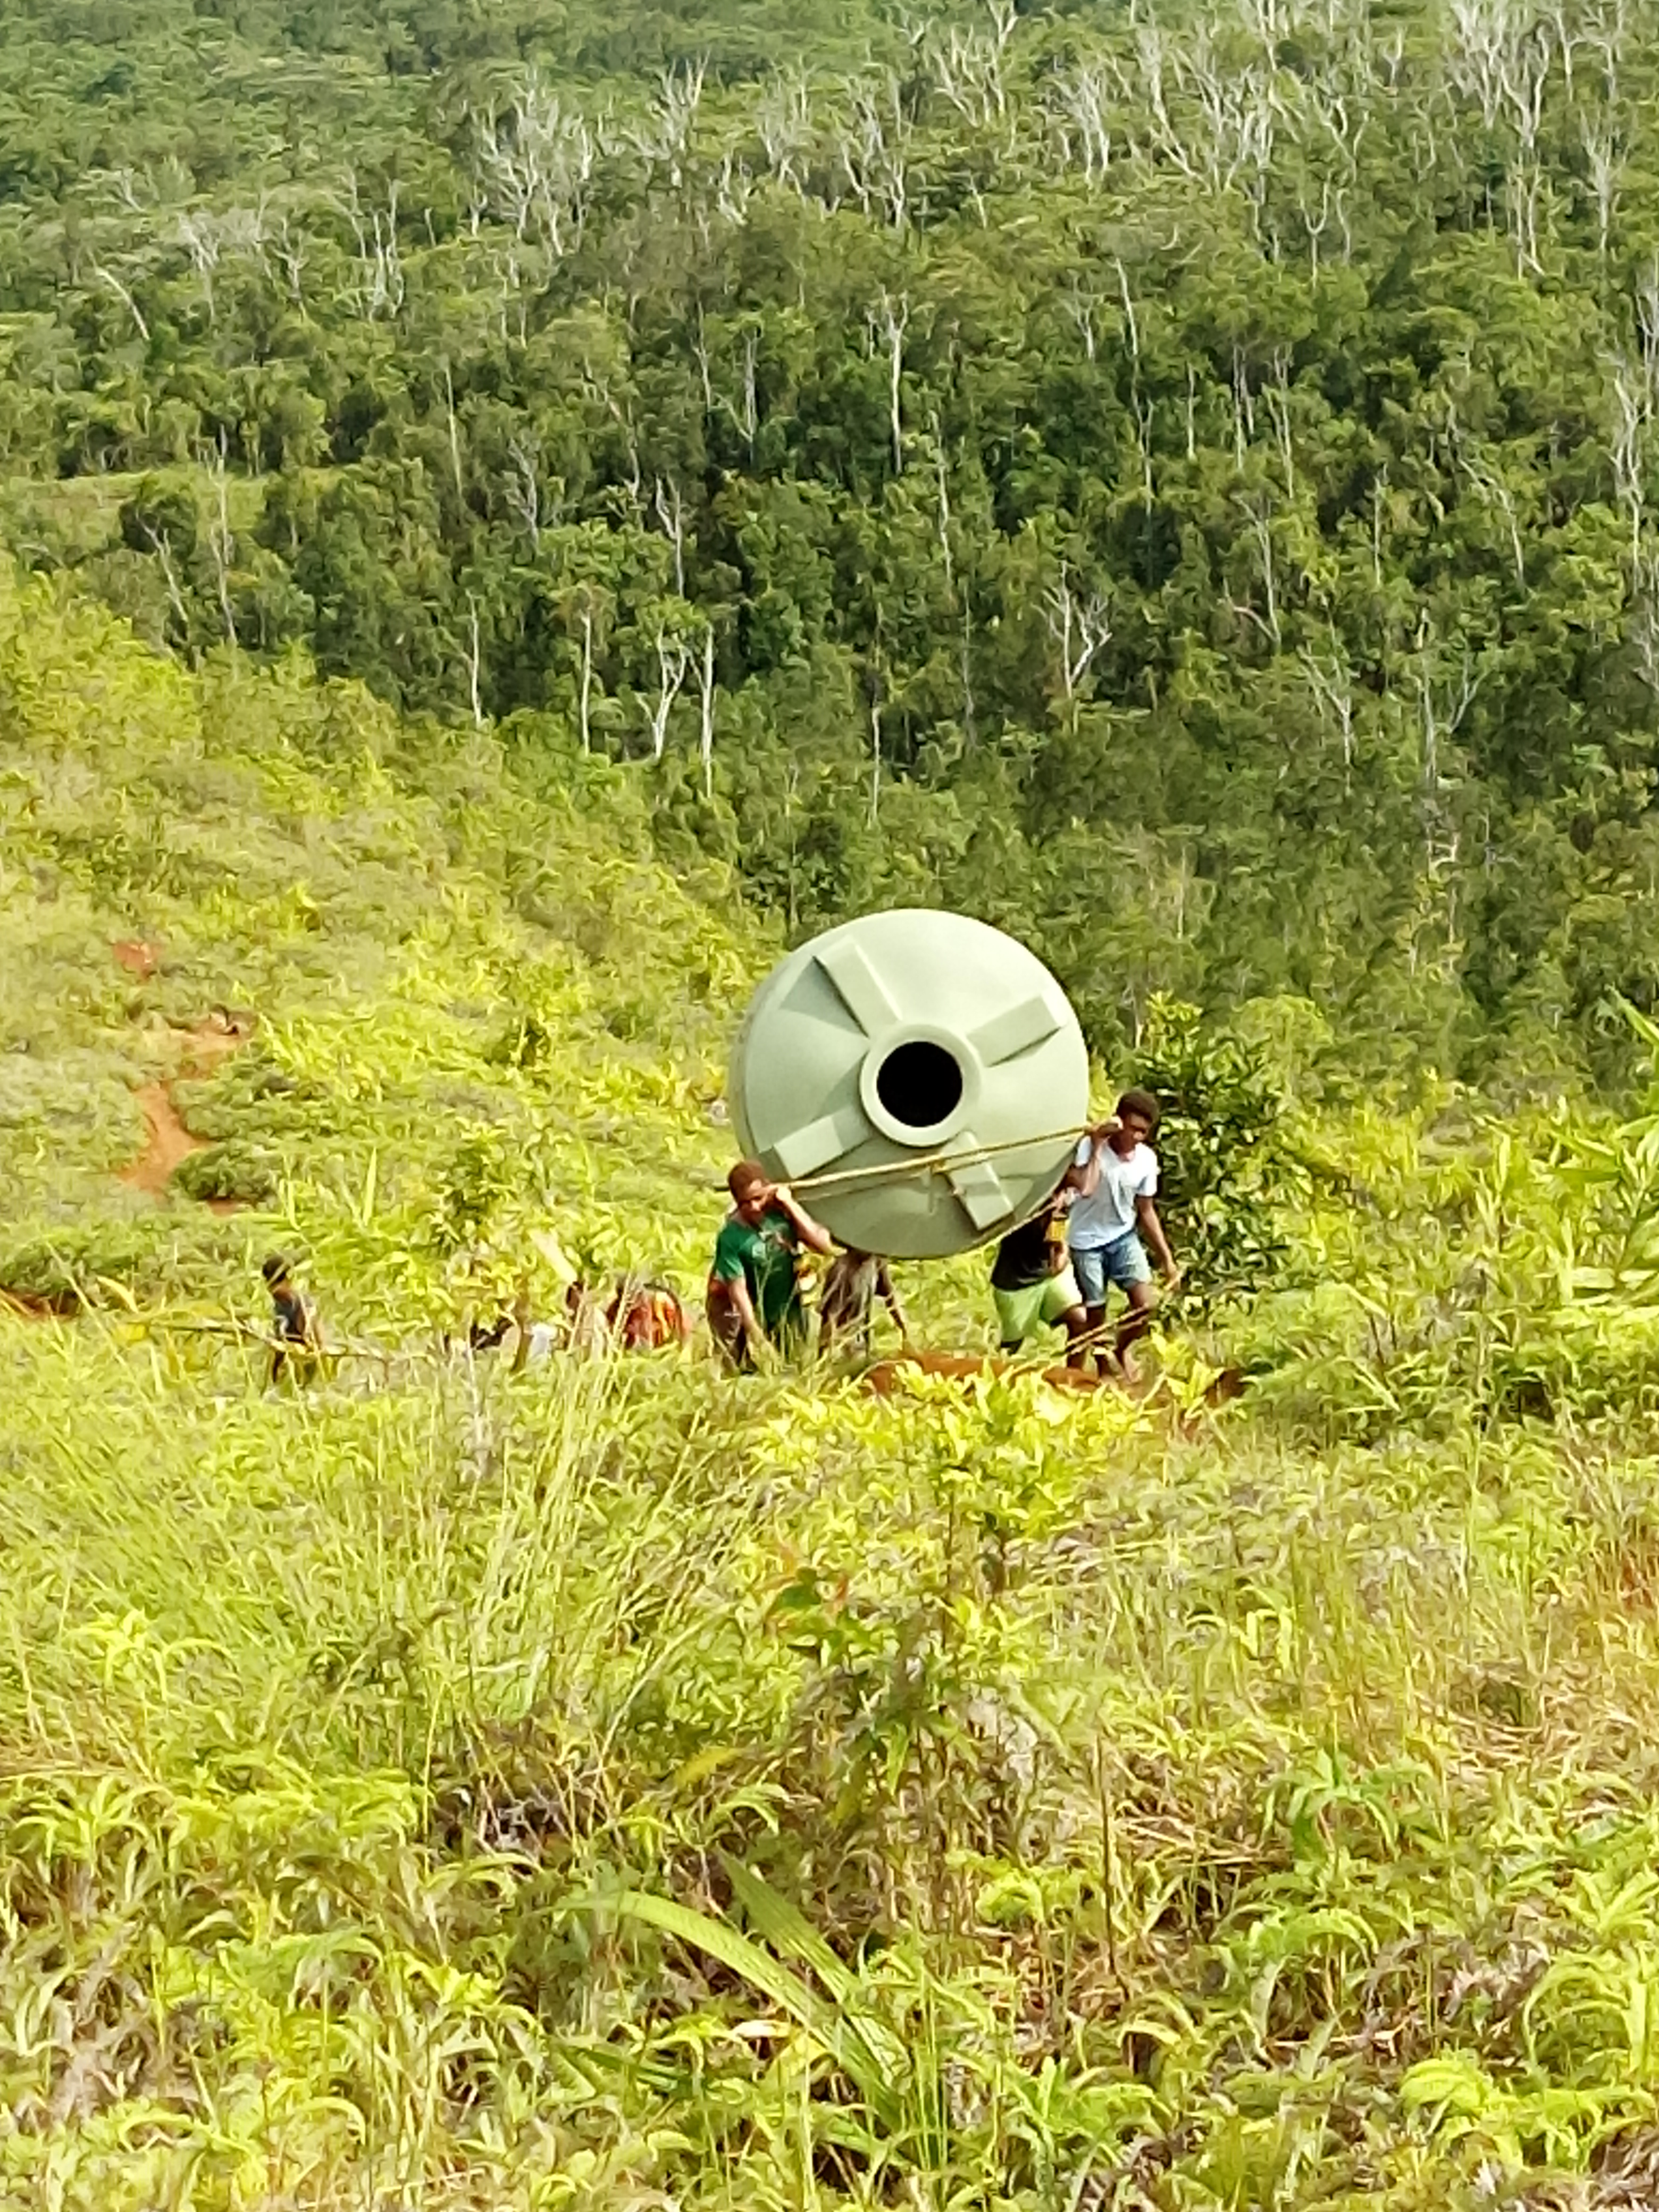 A water tank on its way up to the village (Credit: Terence Wood)